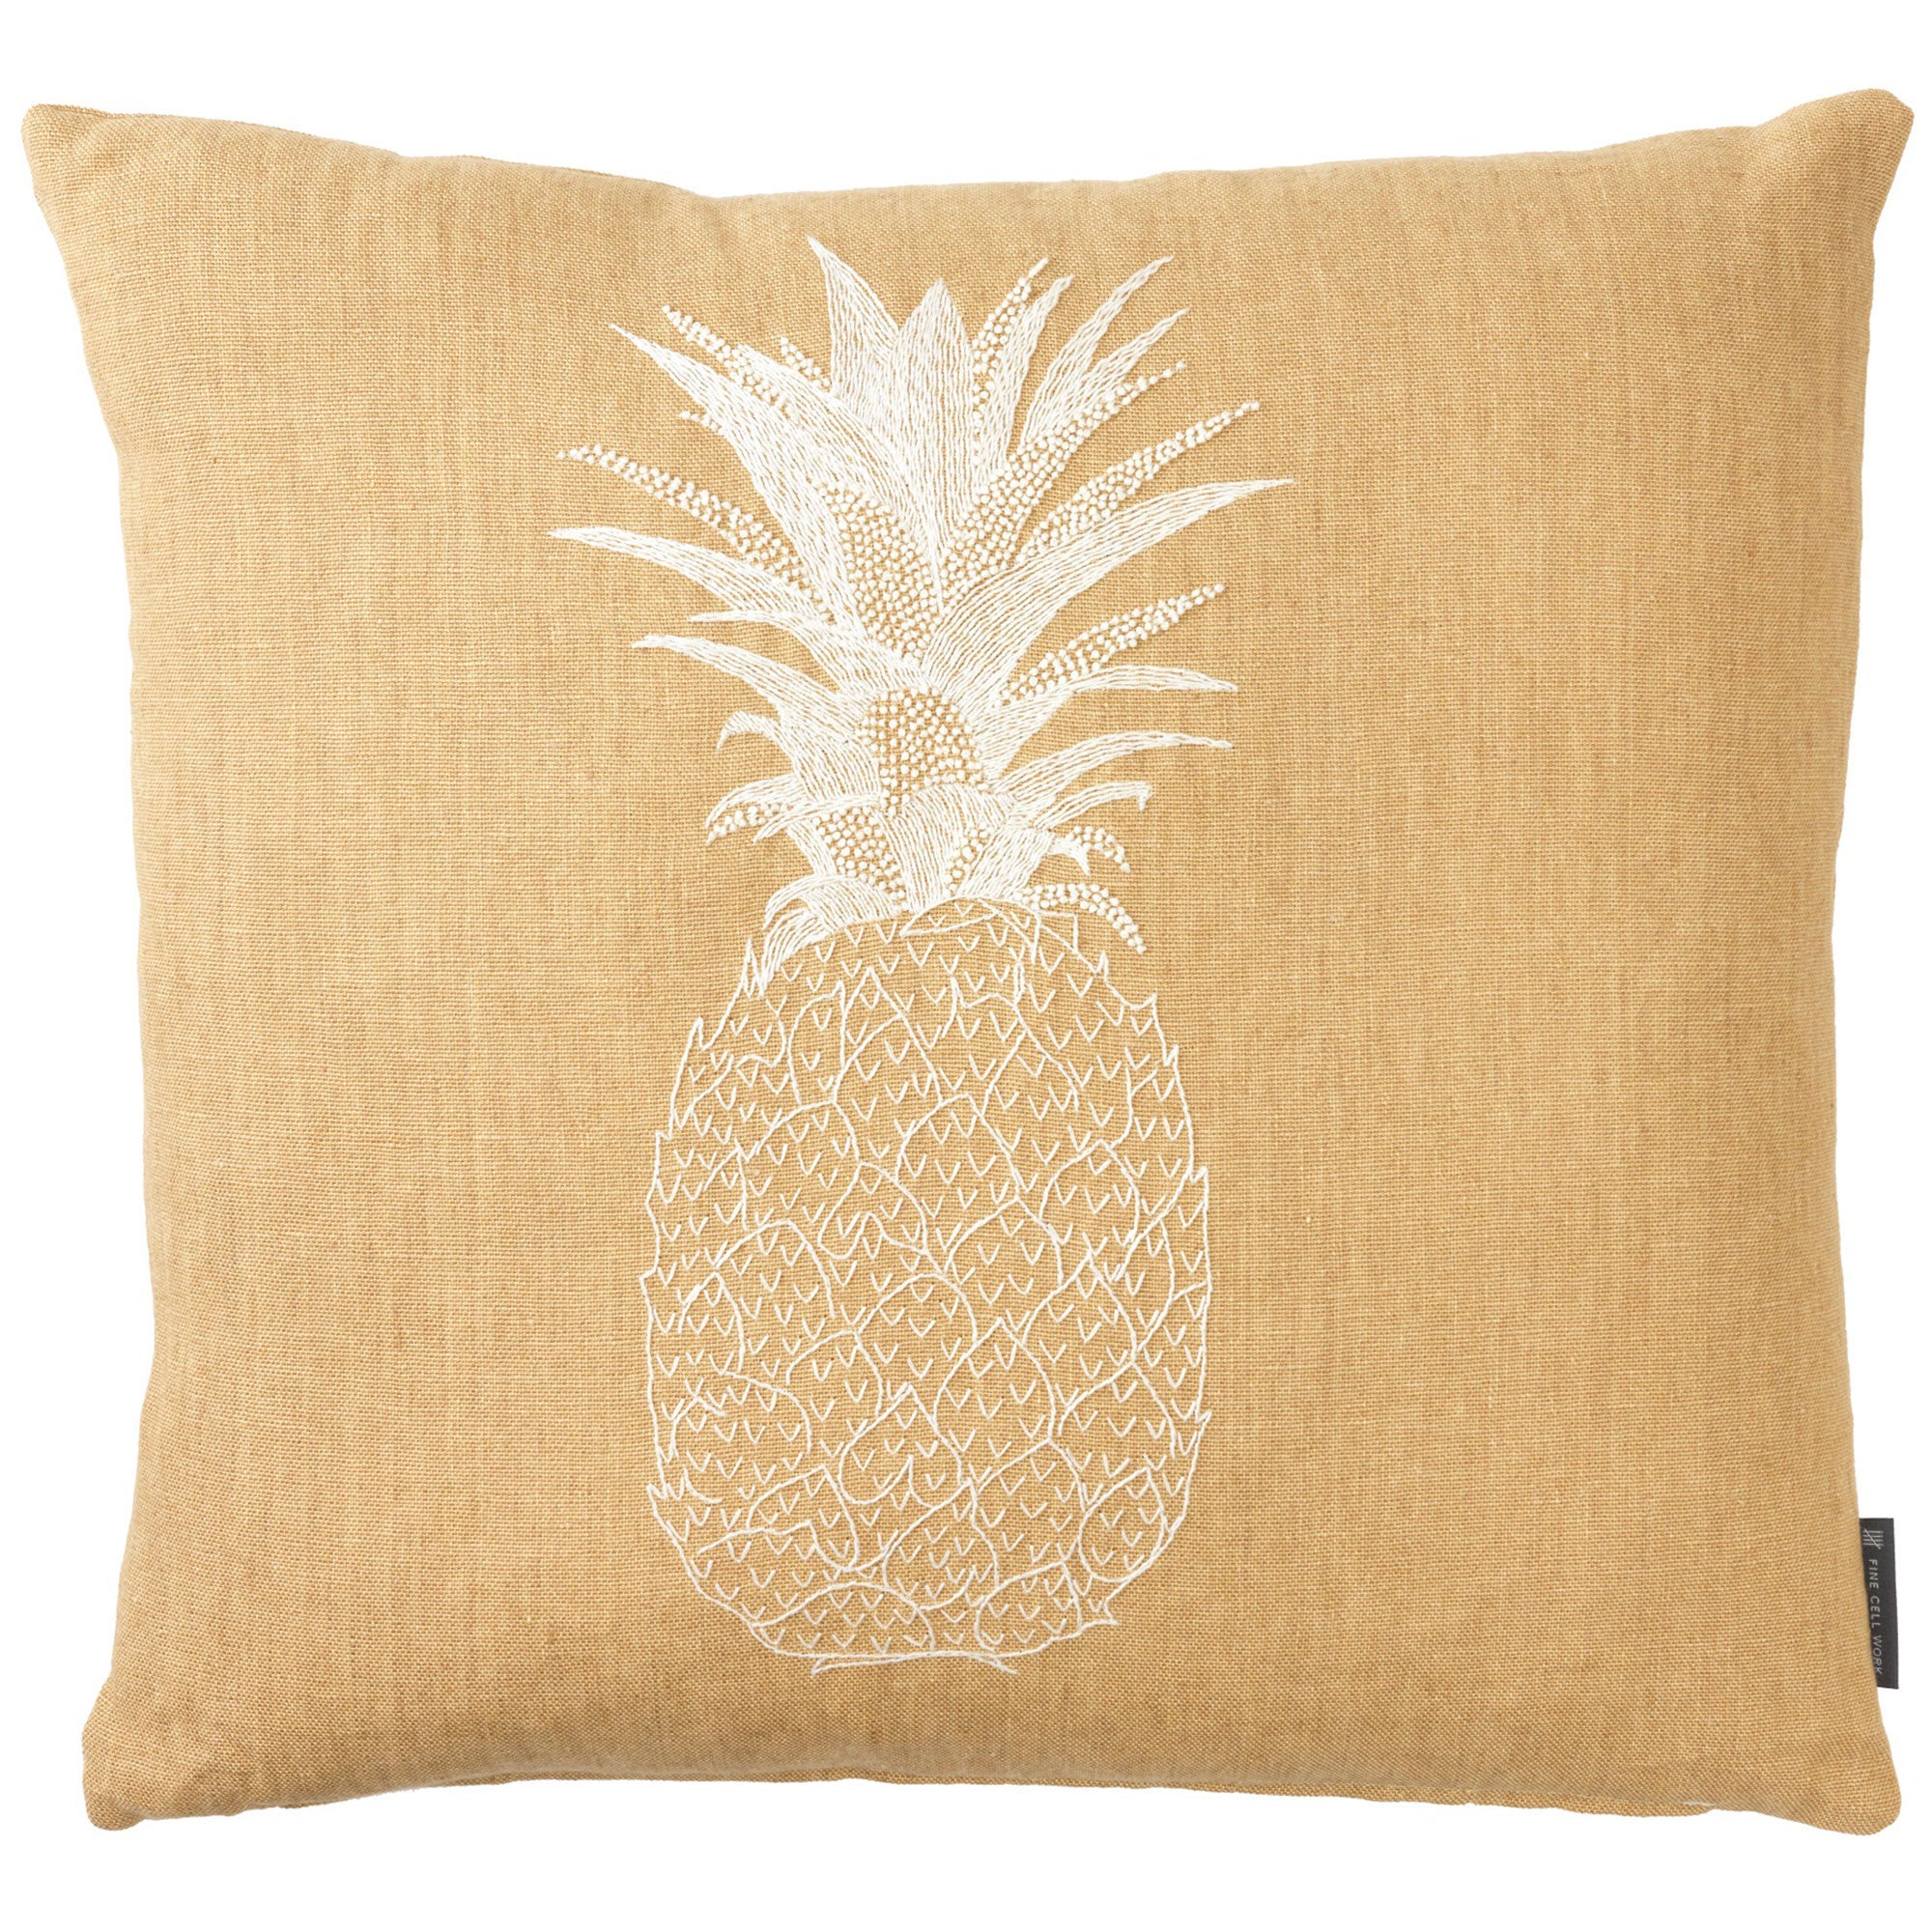 Pineapple Embroidered Cushion White on Beige Melissa Wyndham for Fine Cell Work